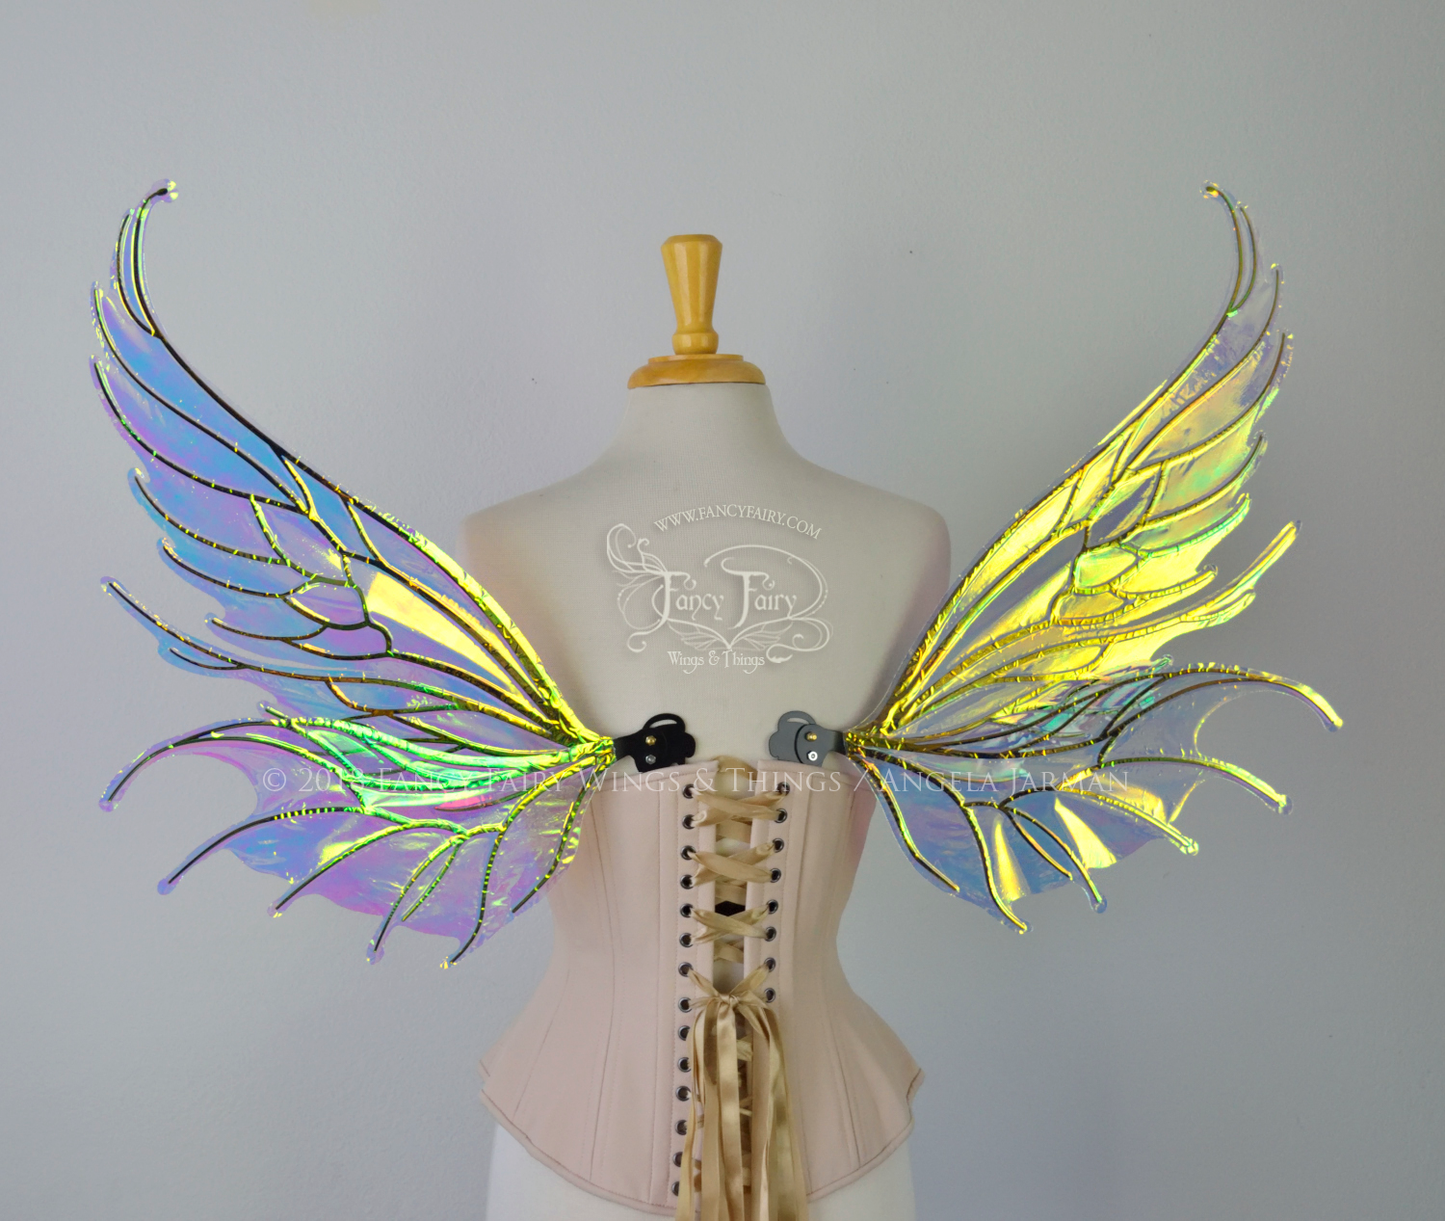 Aquatica Iridescent Convertible Fairy Wings in Clear Diamond Fire with Black veins